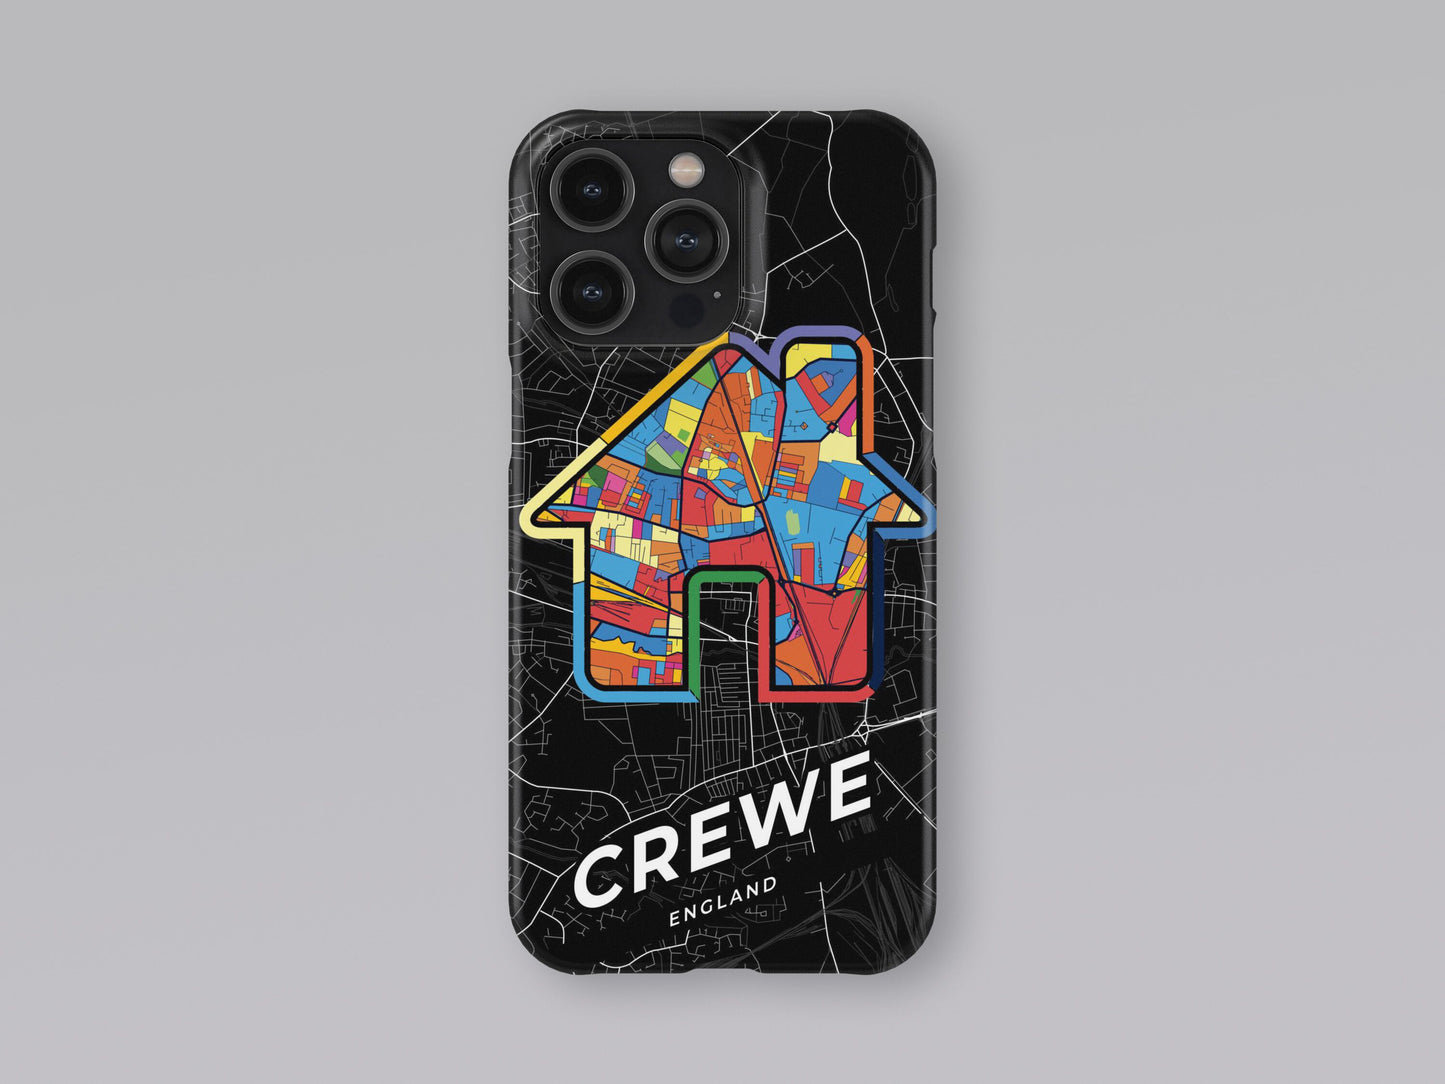 Crewe England slim phone case with colorful icon. Birthday, wedding or housewarming gift. Couple match cases. 3